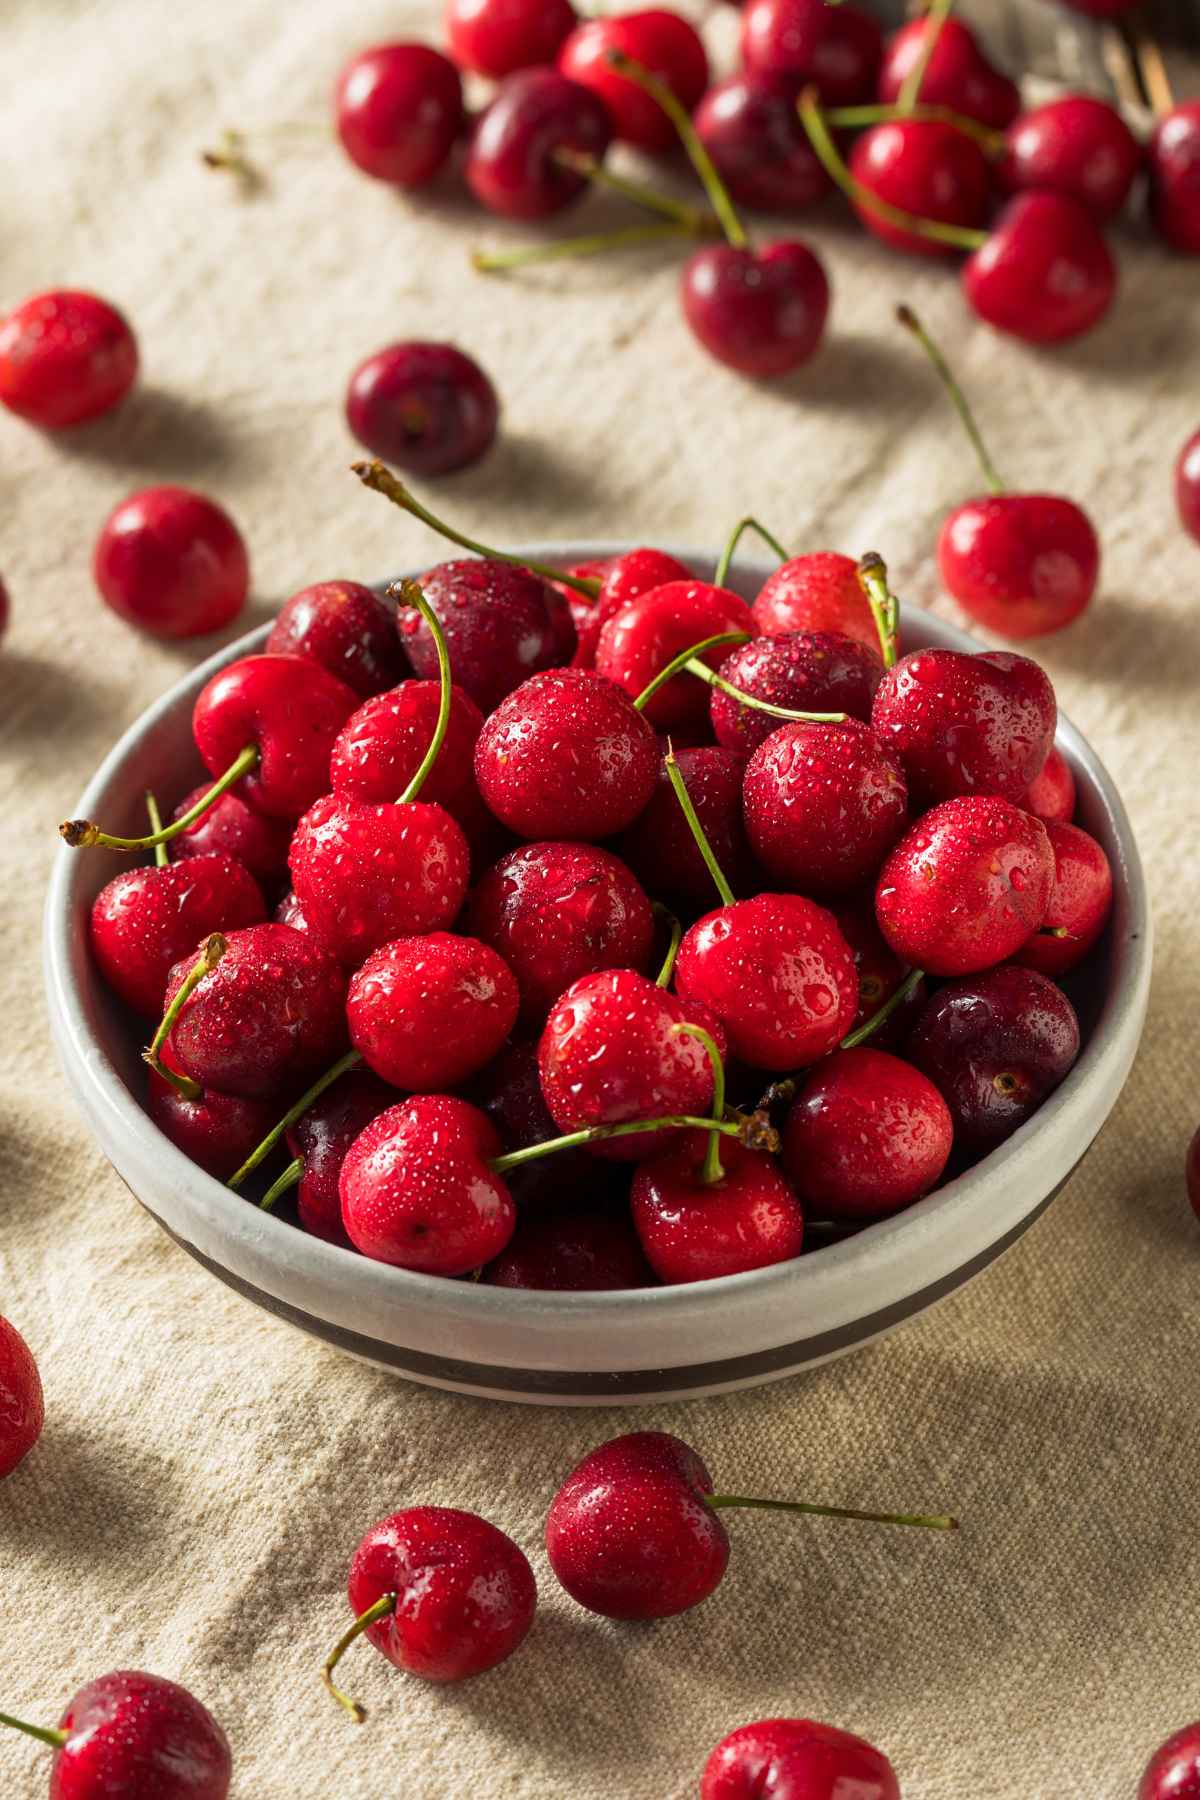 Are cherries keto-friendly? How many carbs are in cherries? Read on to find out if cherries fit into your keto diet. Discover what the carb content is and what alternatives you may have to choose from.